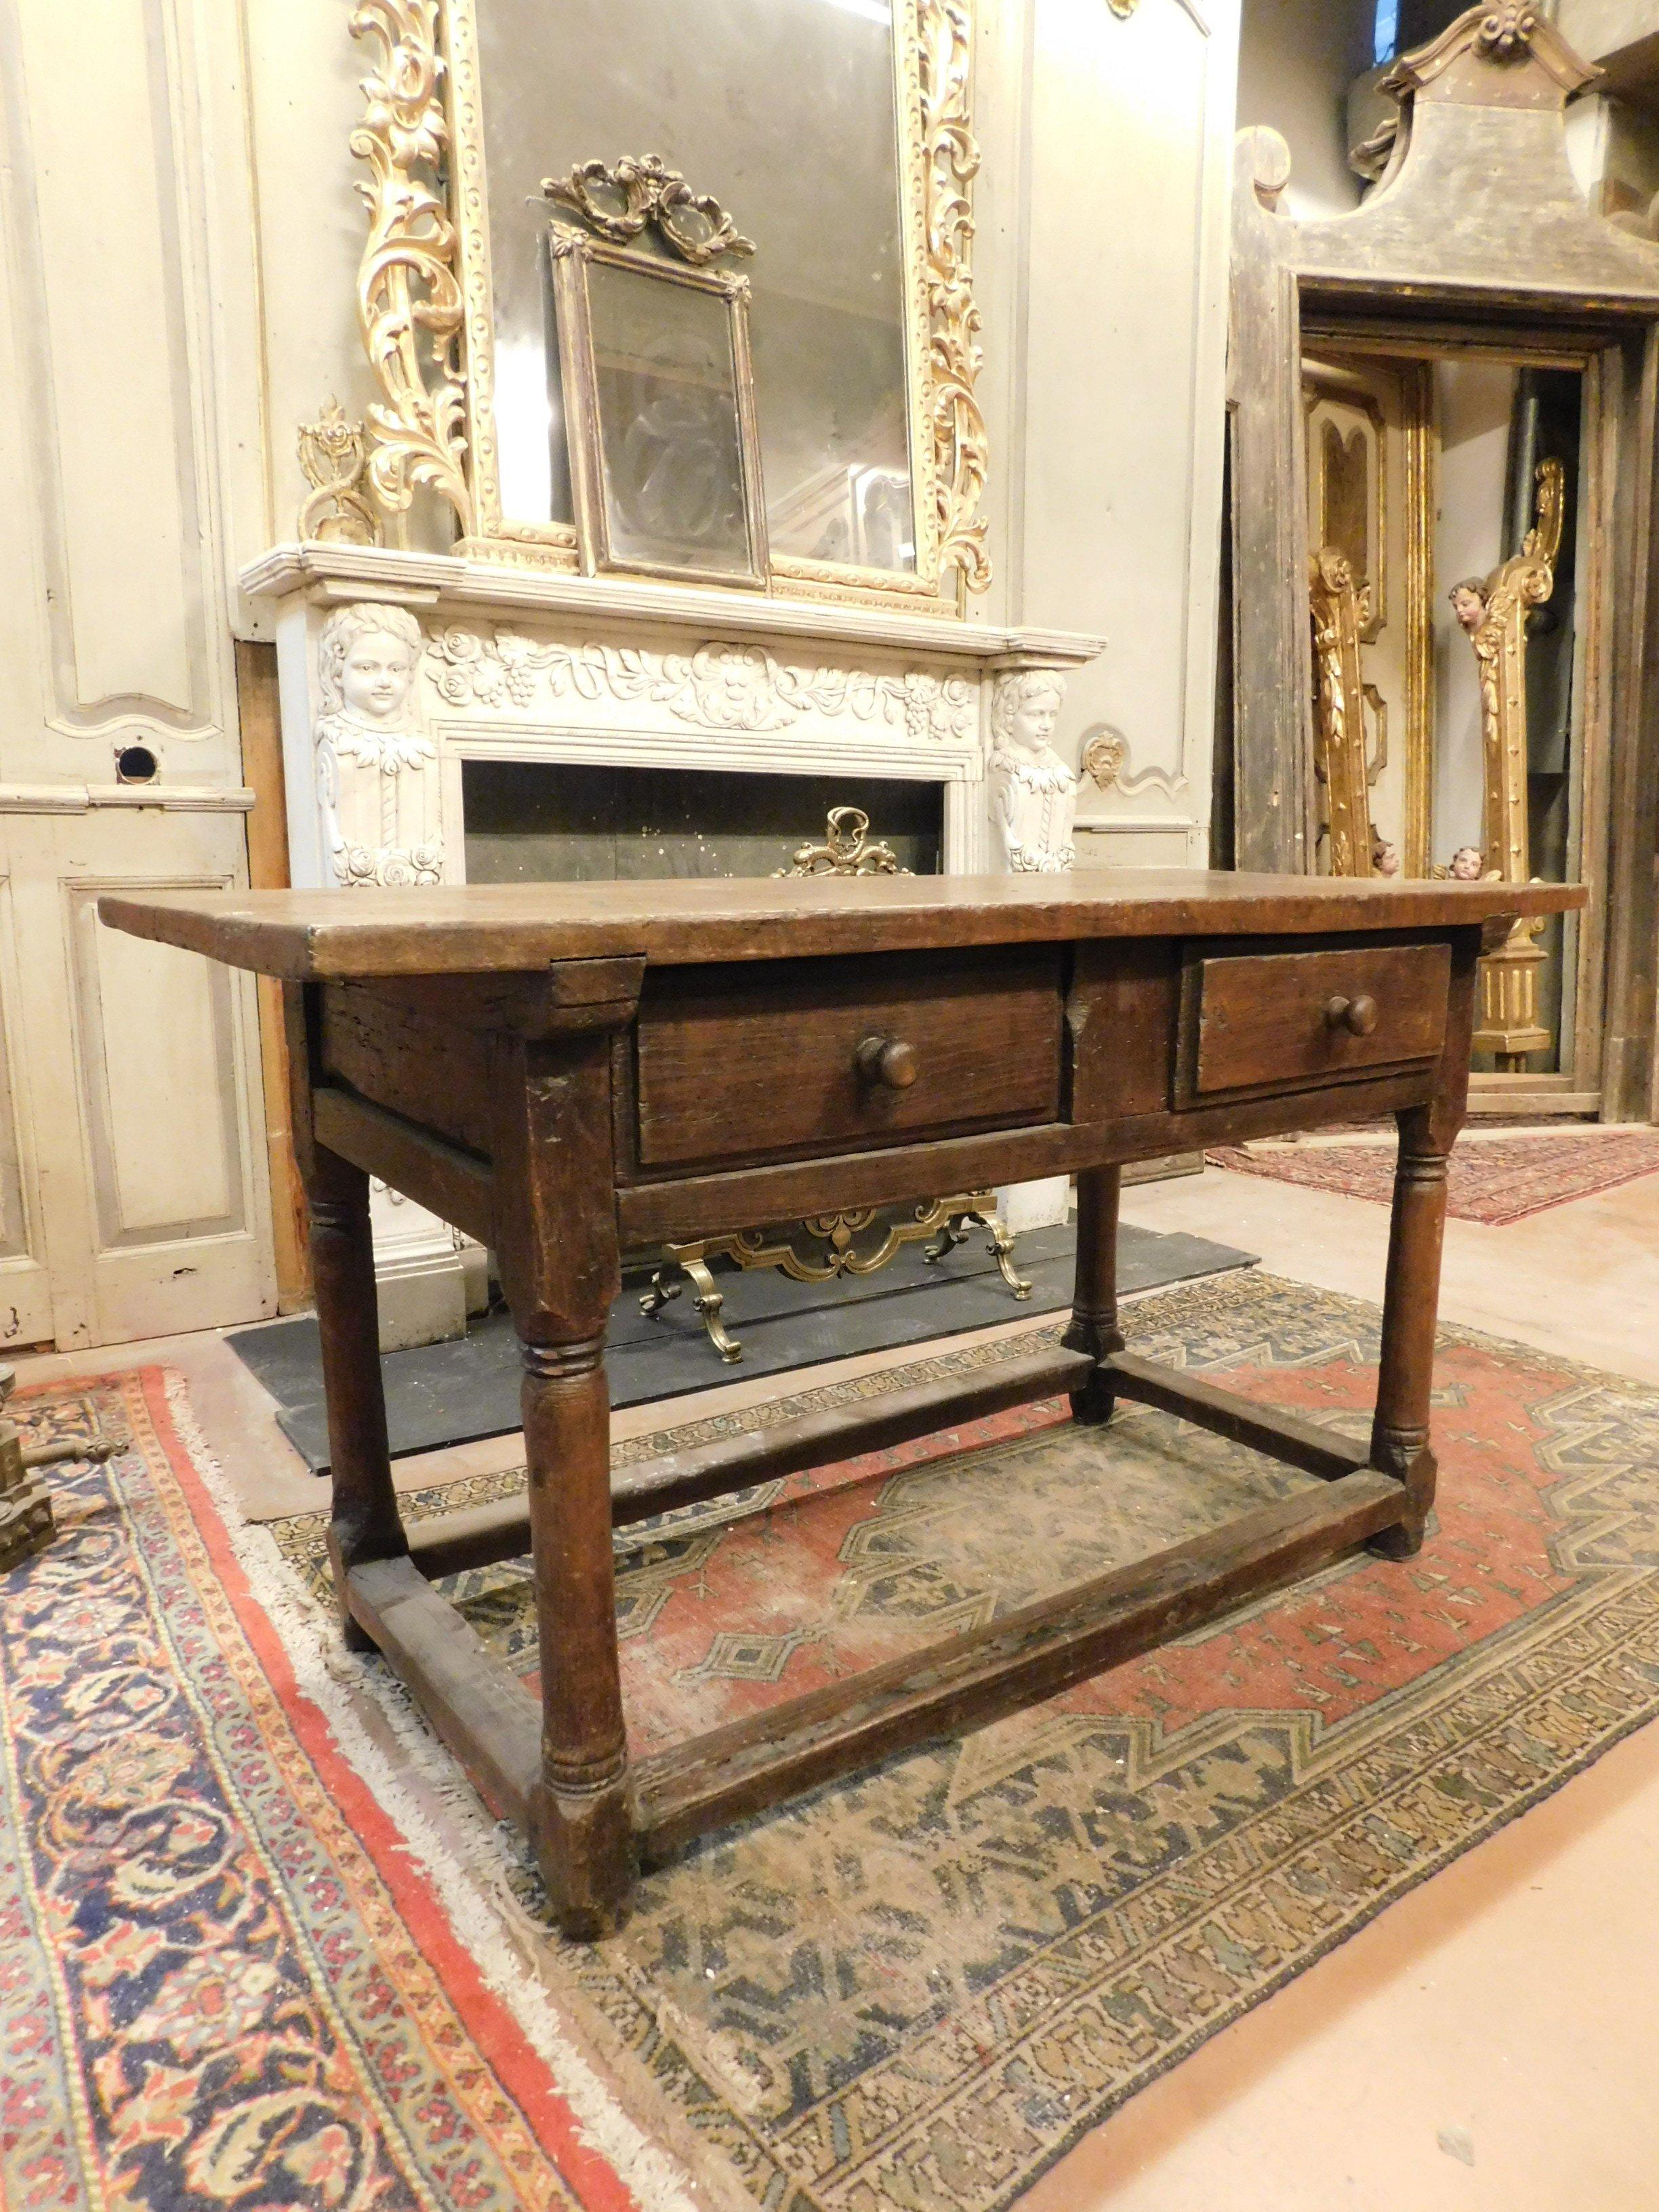 Italian Antique Chestnut Table with Drawers, 17th Century Italy For Sale